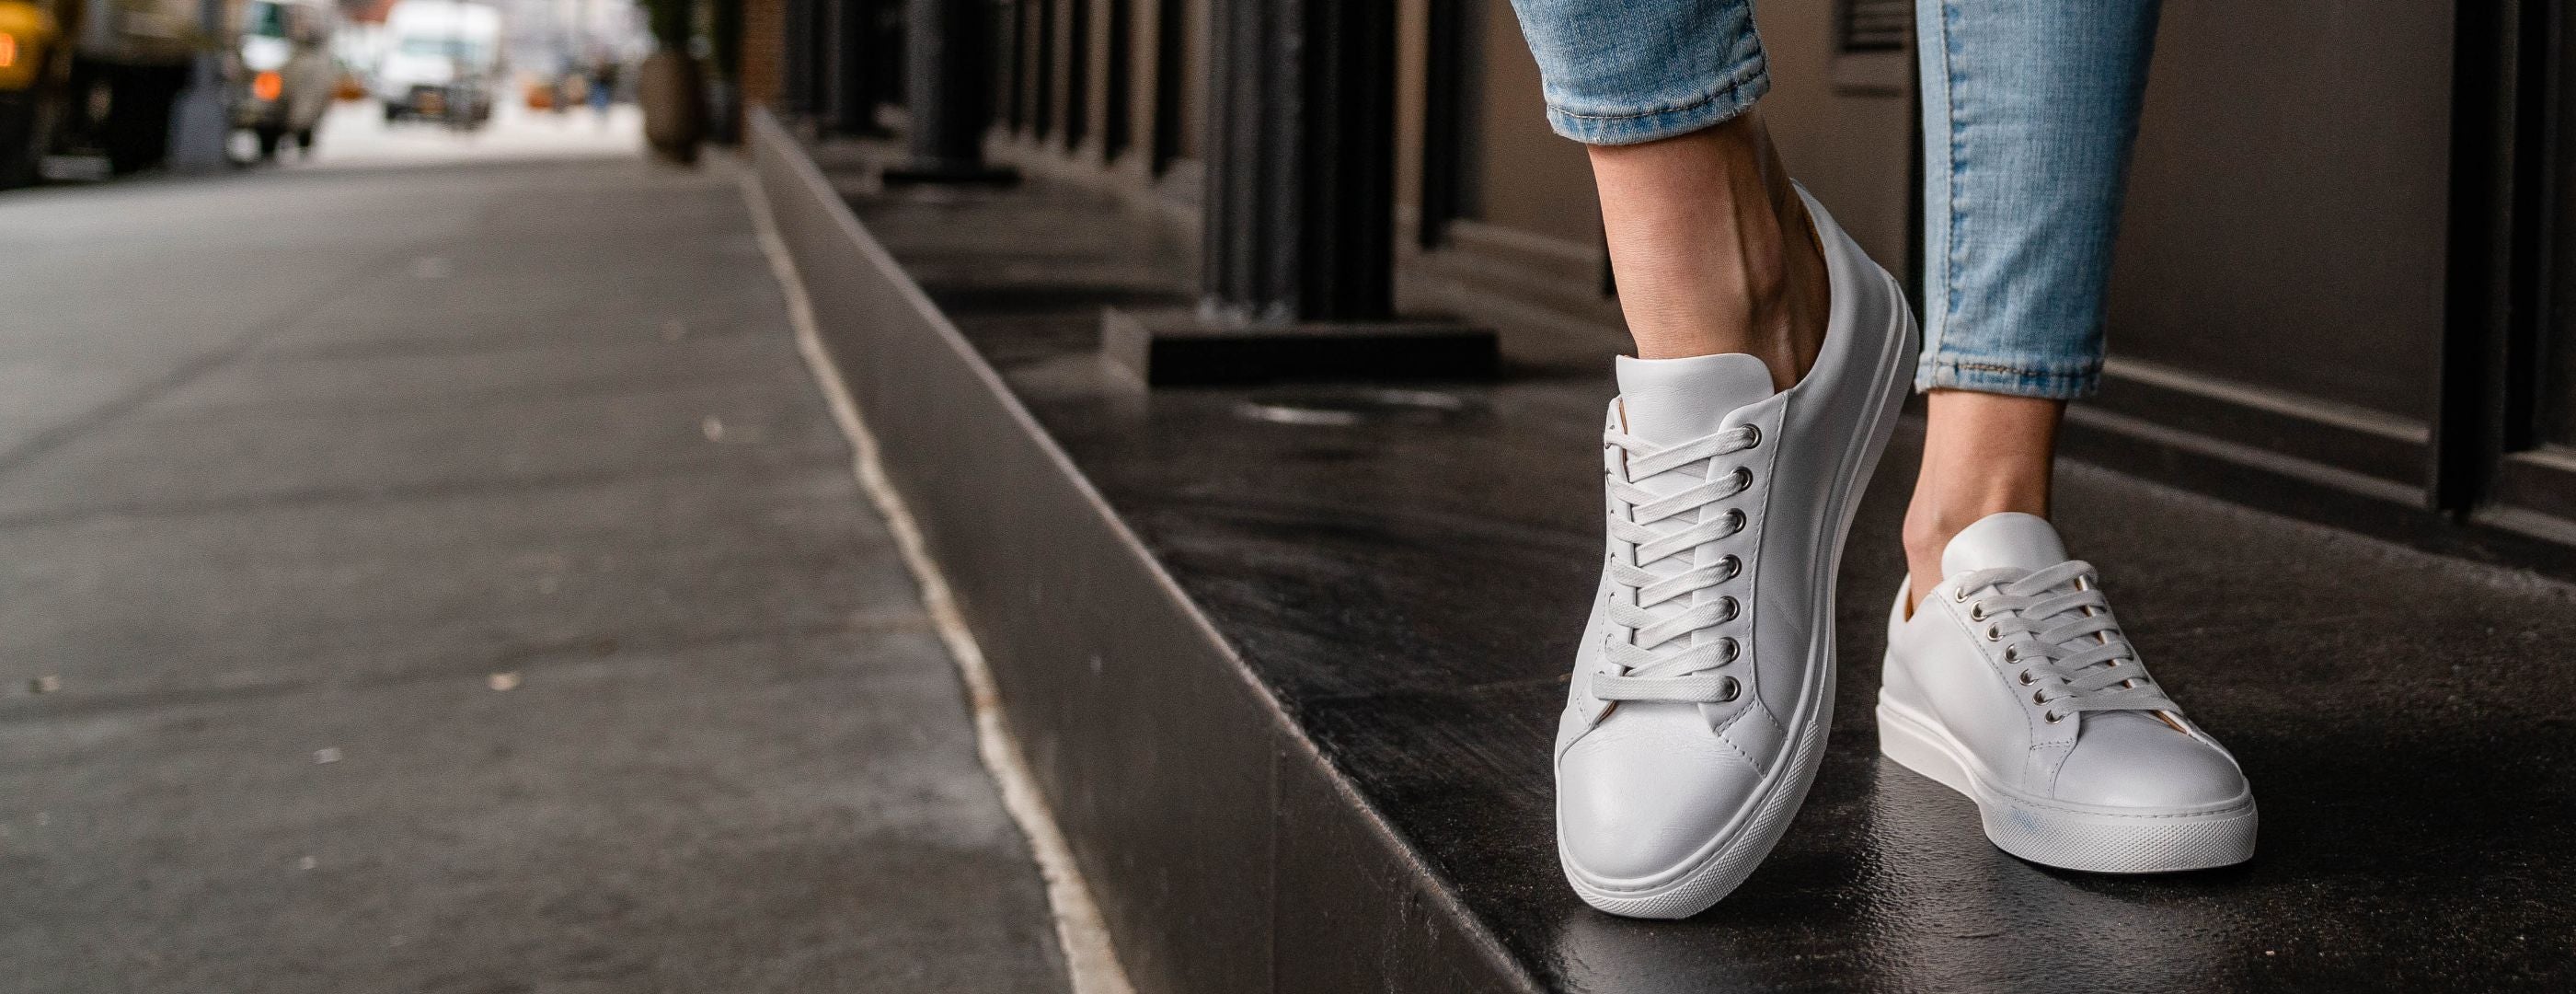 Women's Premier Low Top In White Leather - Thursday Boot Company